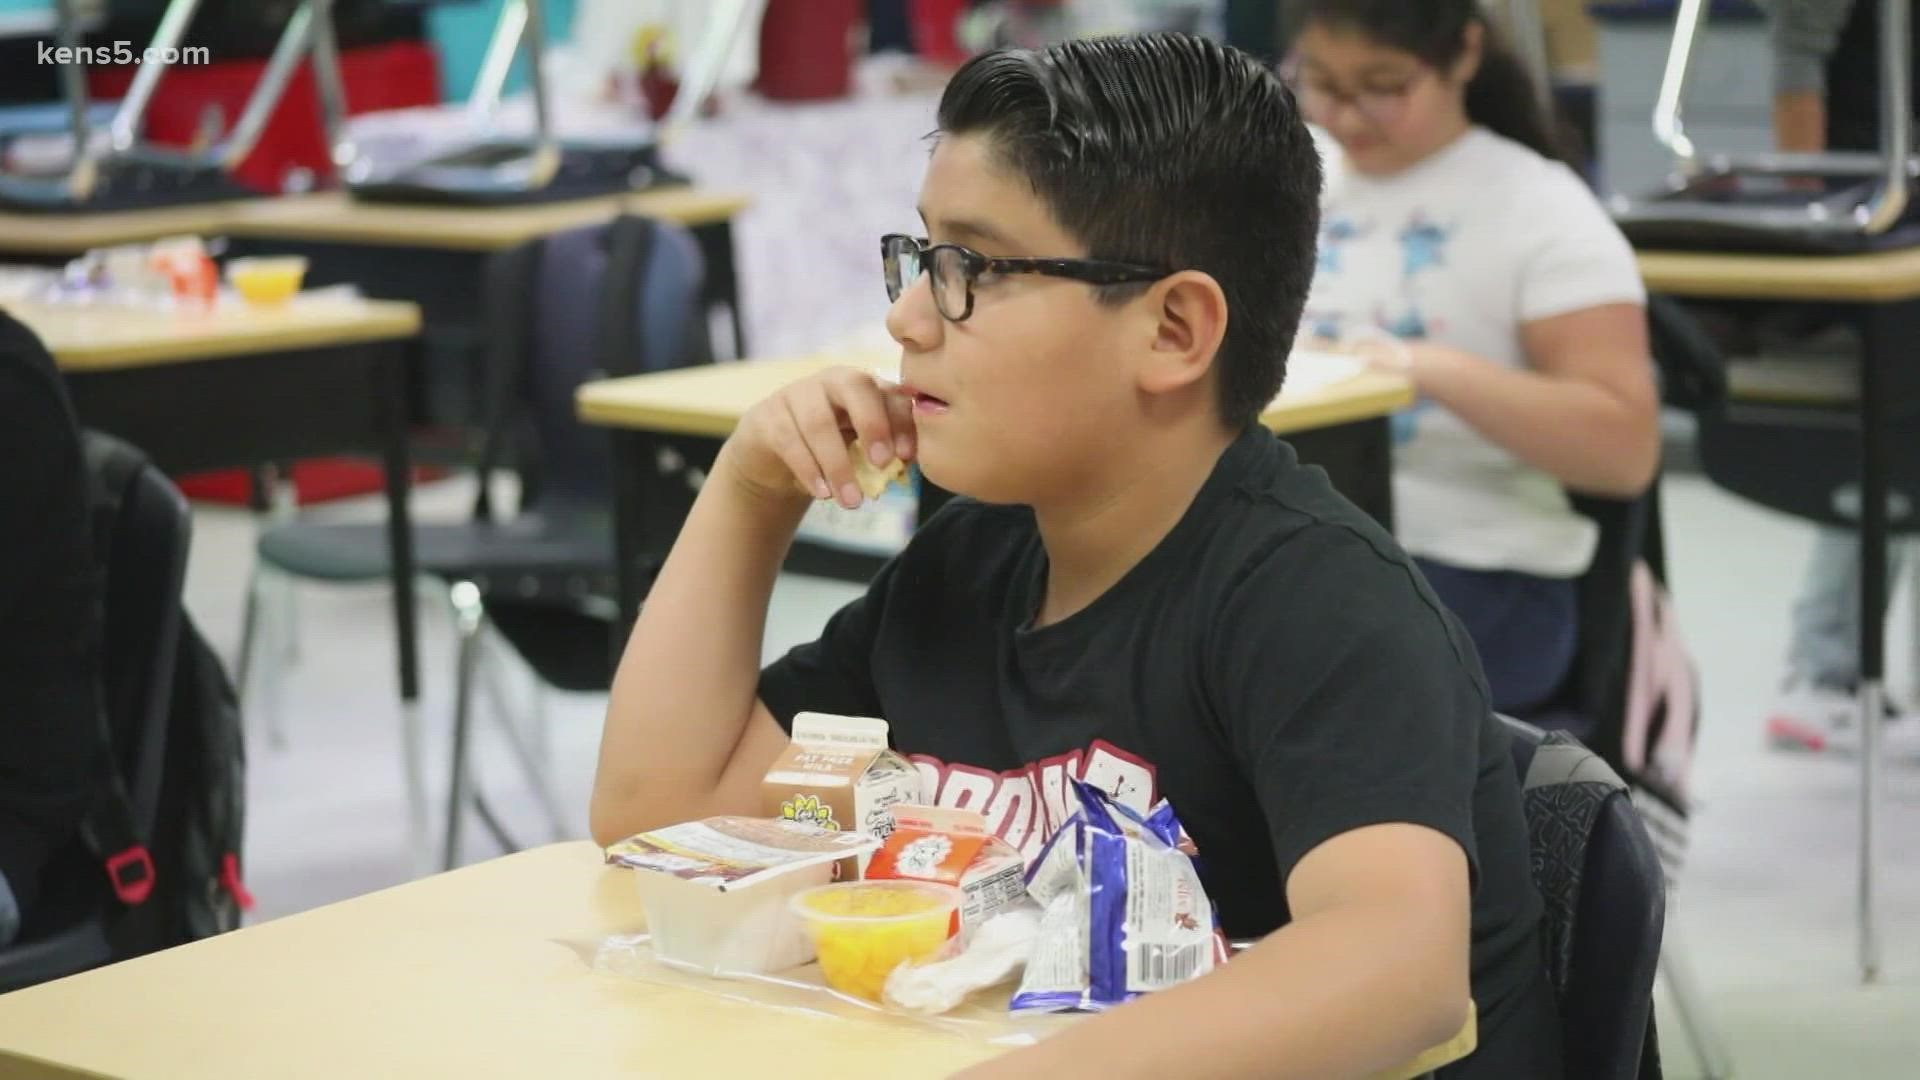 It's part of a new pilot program that started the first week of April. Health experts say breakfast helps students learn and motivates them to come to school.